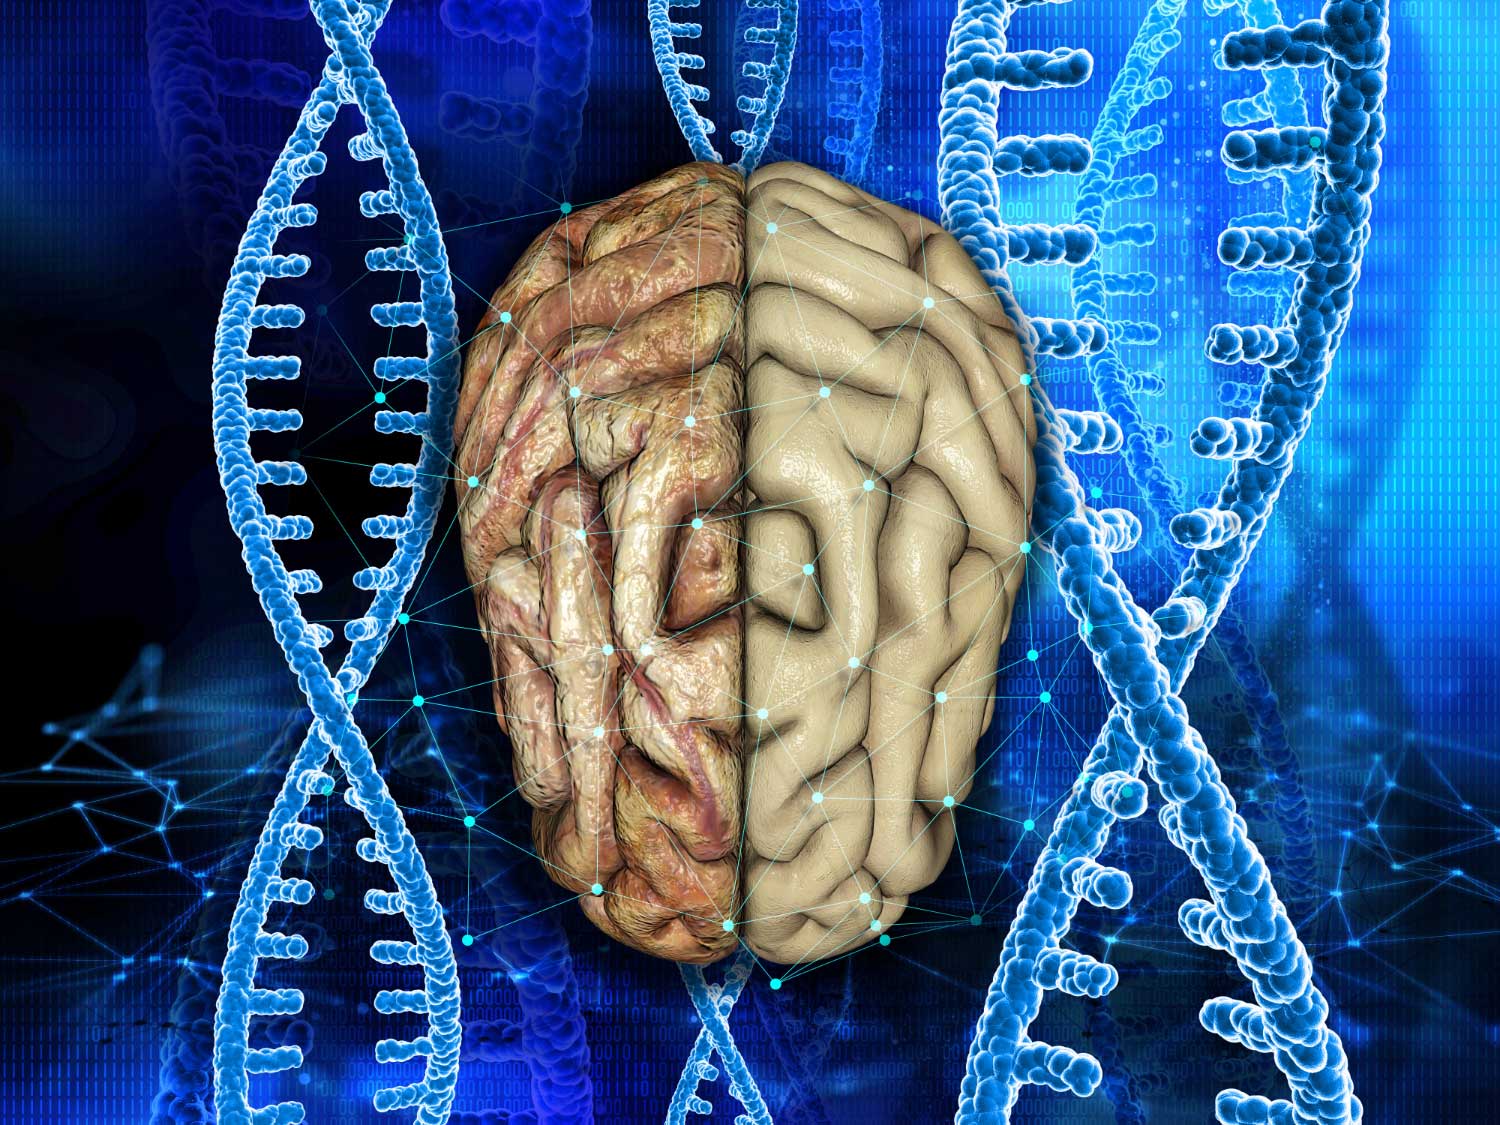 3d medical background with healthy and unhealthy brain on dna strands